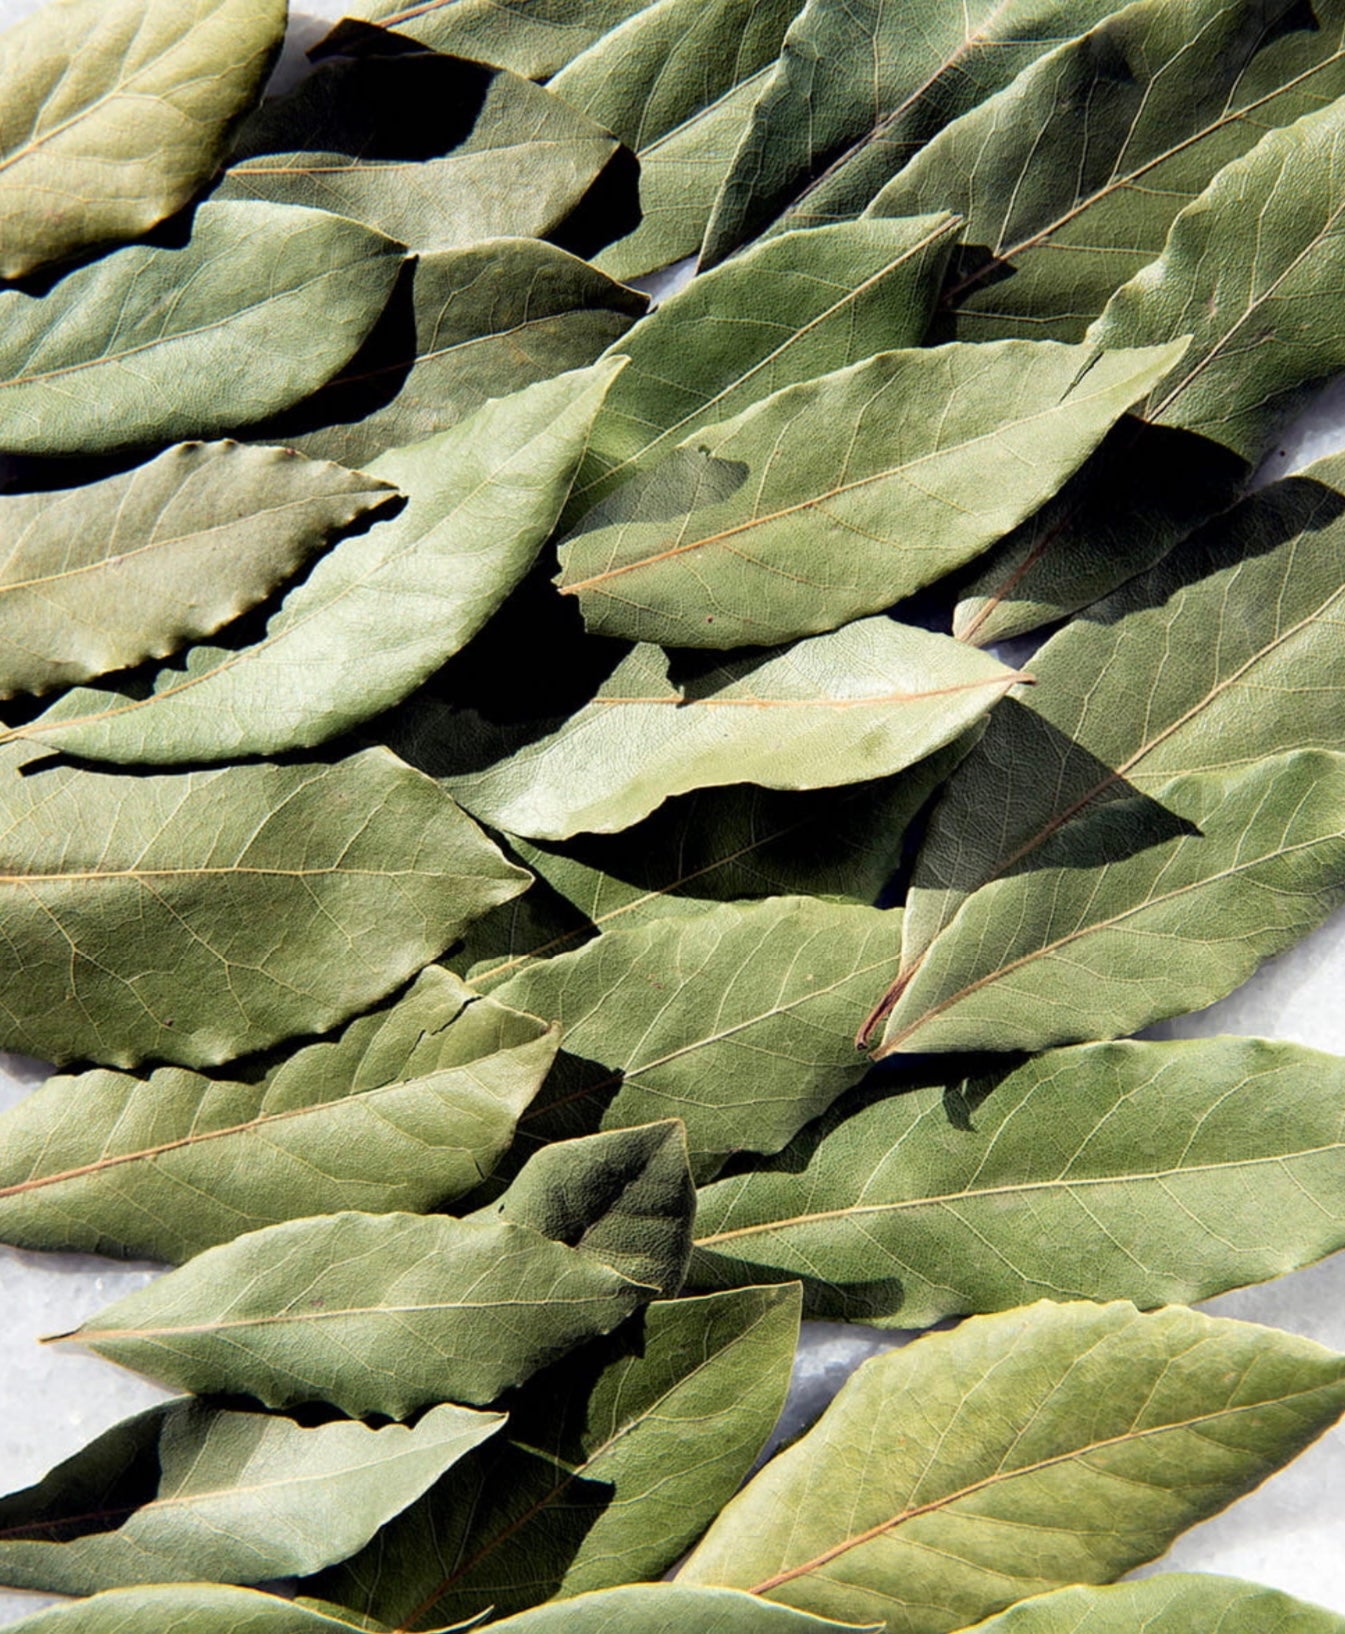 Daphnis and Chloe - Herbs and Spices - Bay Leaves